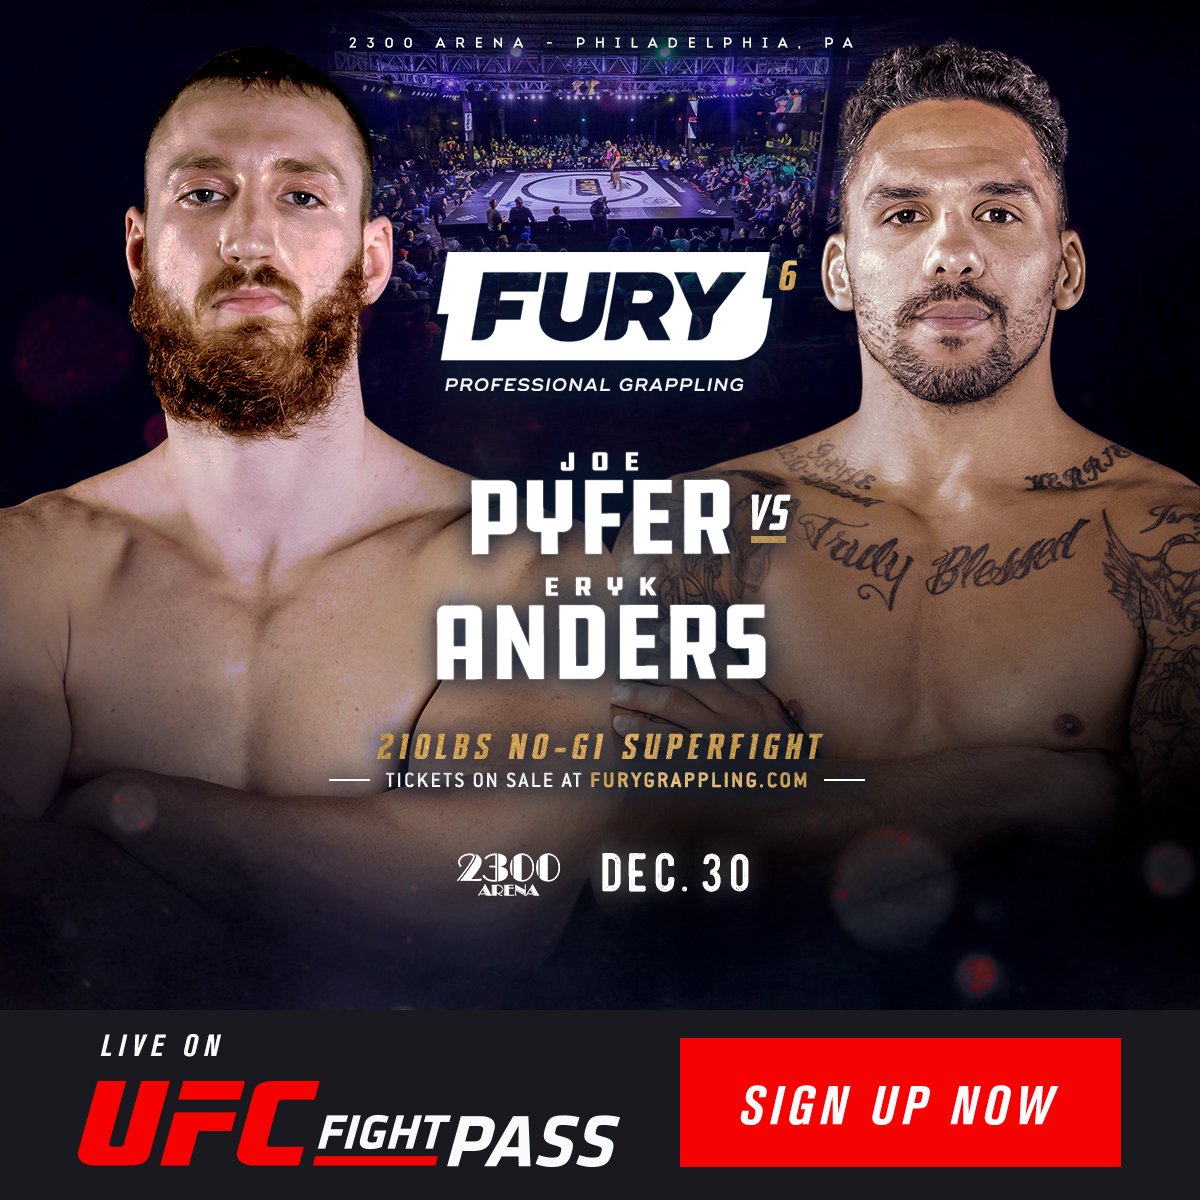 FURY Professional Grappling returns for blockbuster year-end event on Friday, December 30 — Cage Fury Fighting Championships